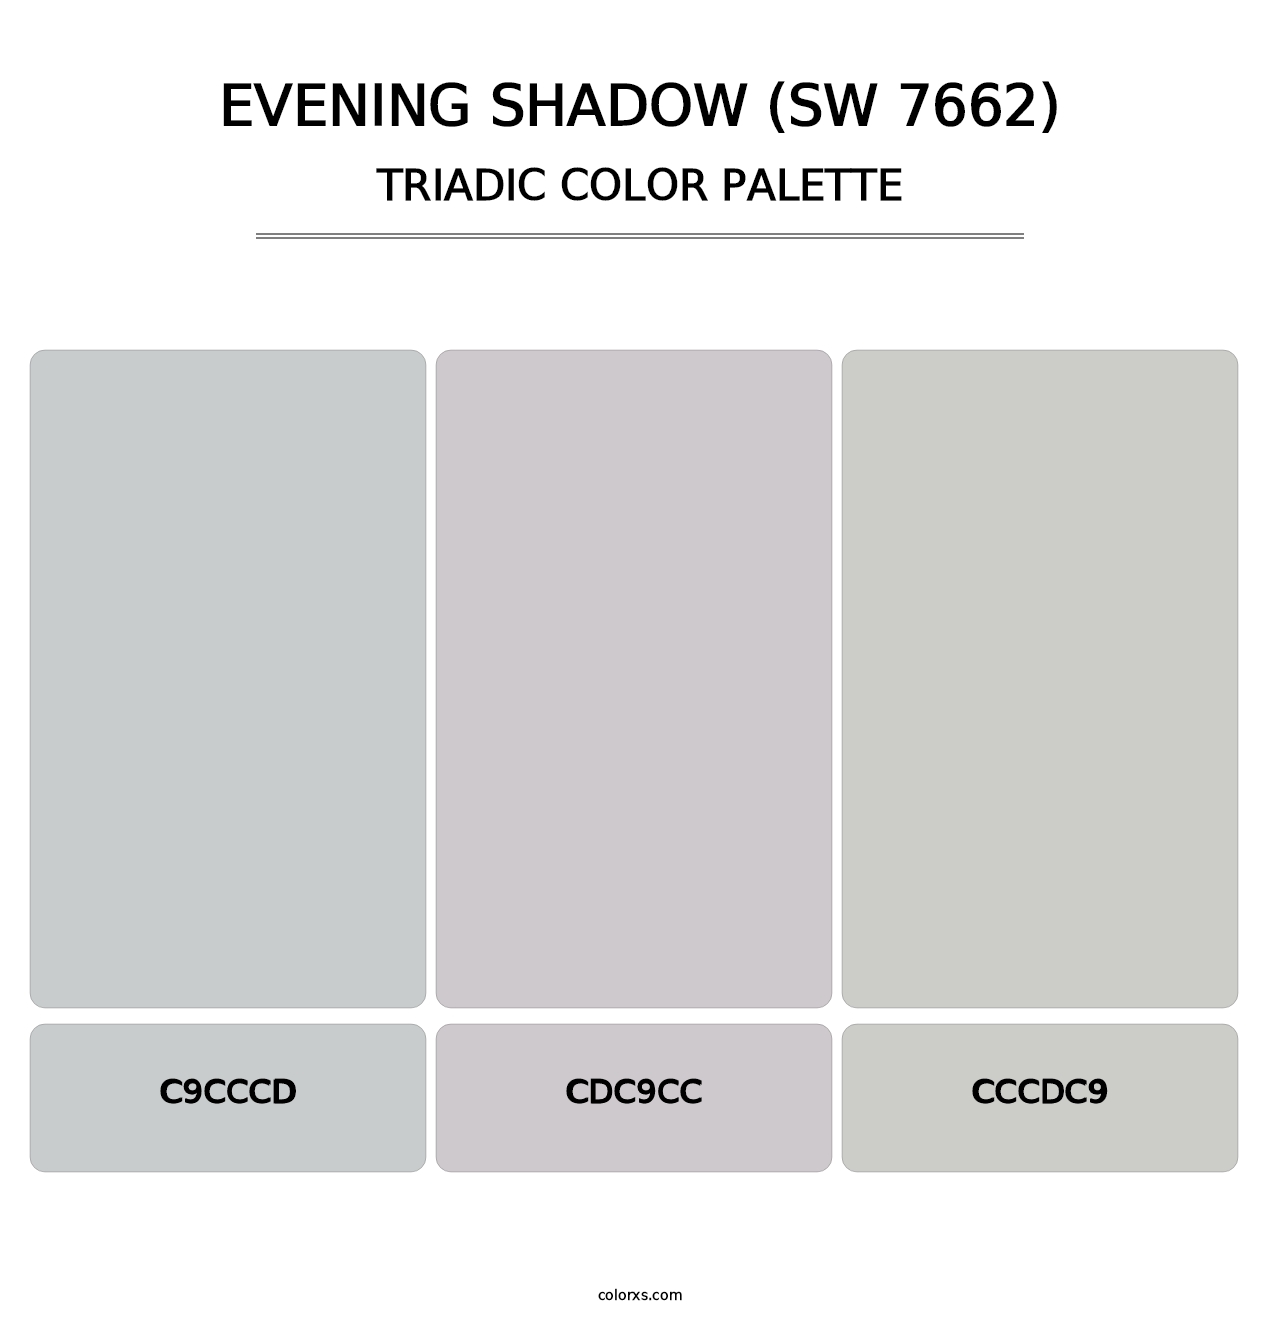 Evening Shadow (SW 7662) - Triadic Color Palette